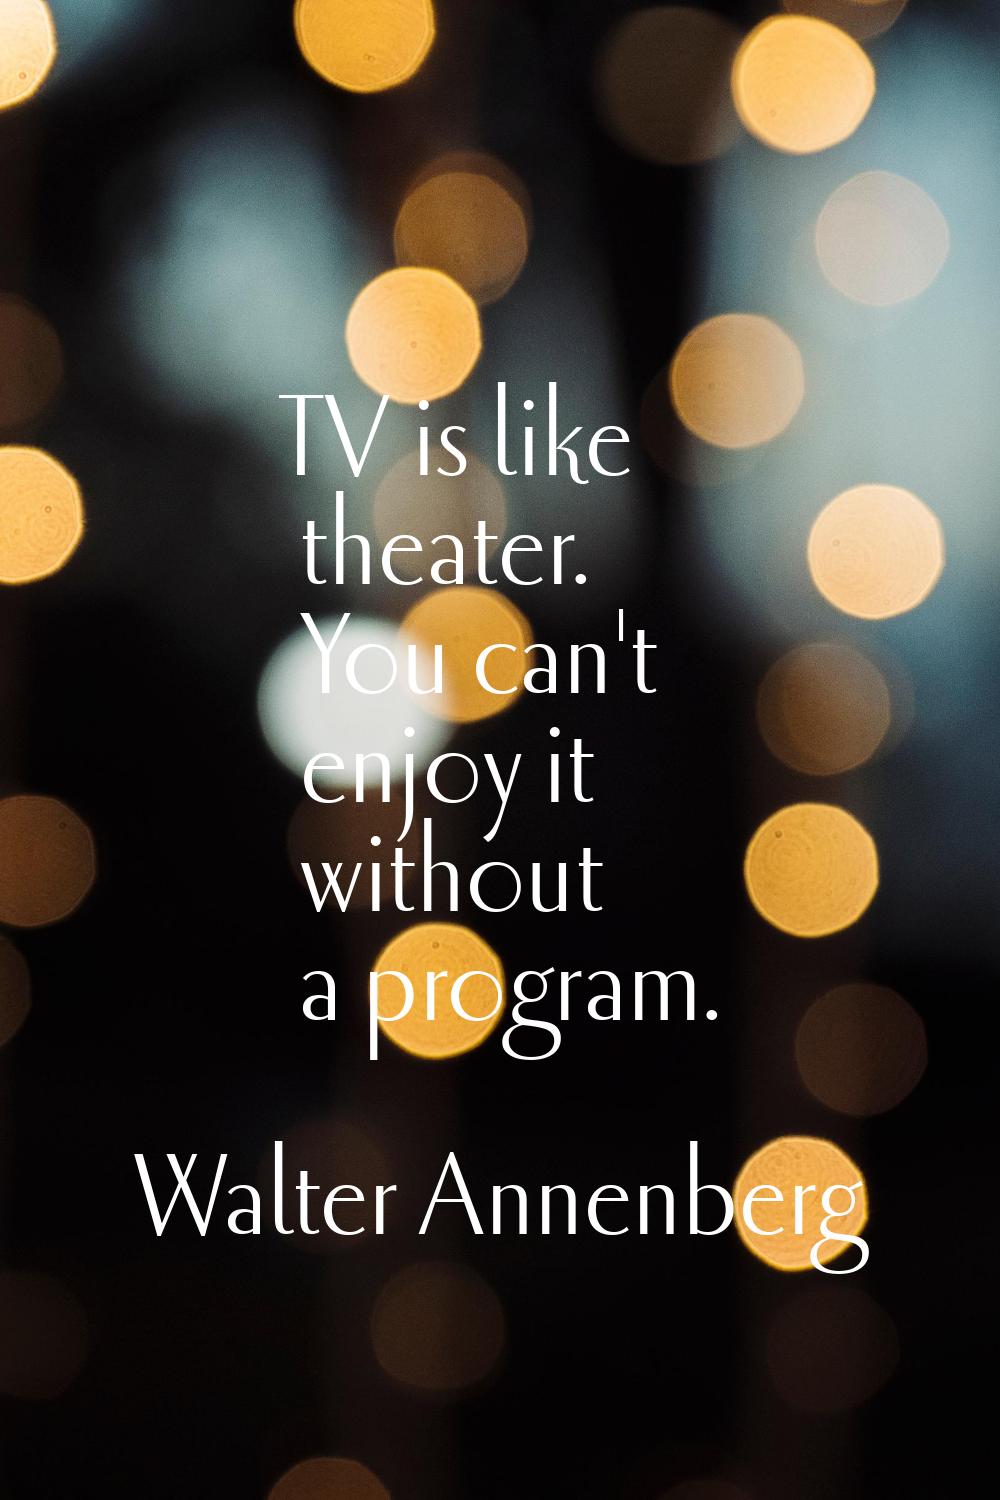 TV is like theater. You can't enjoy it without a program.